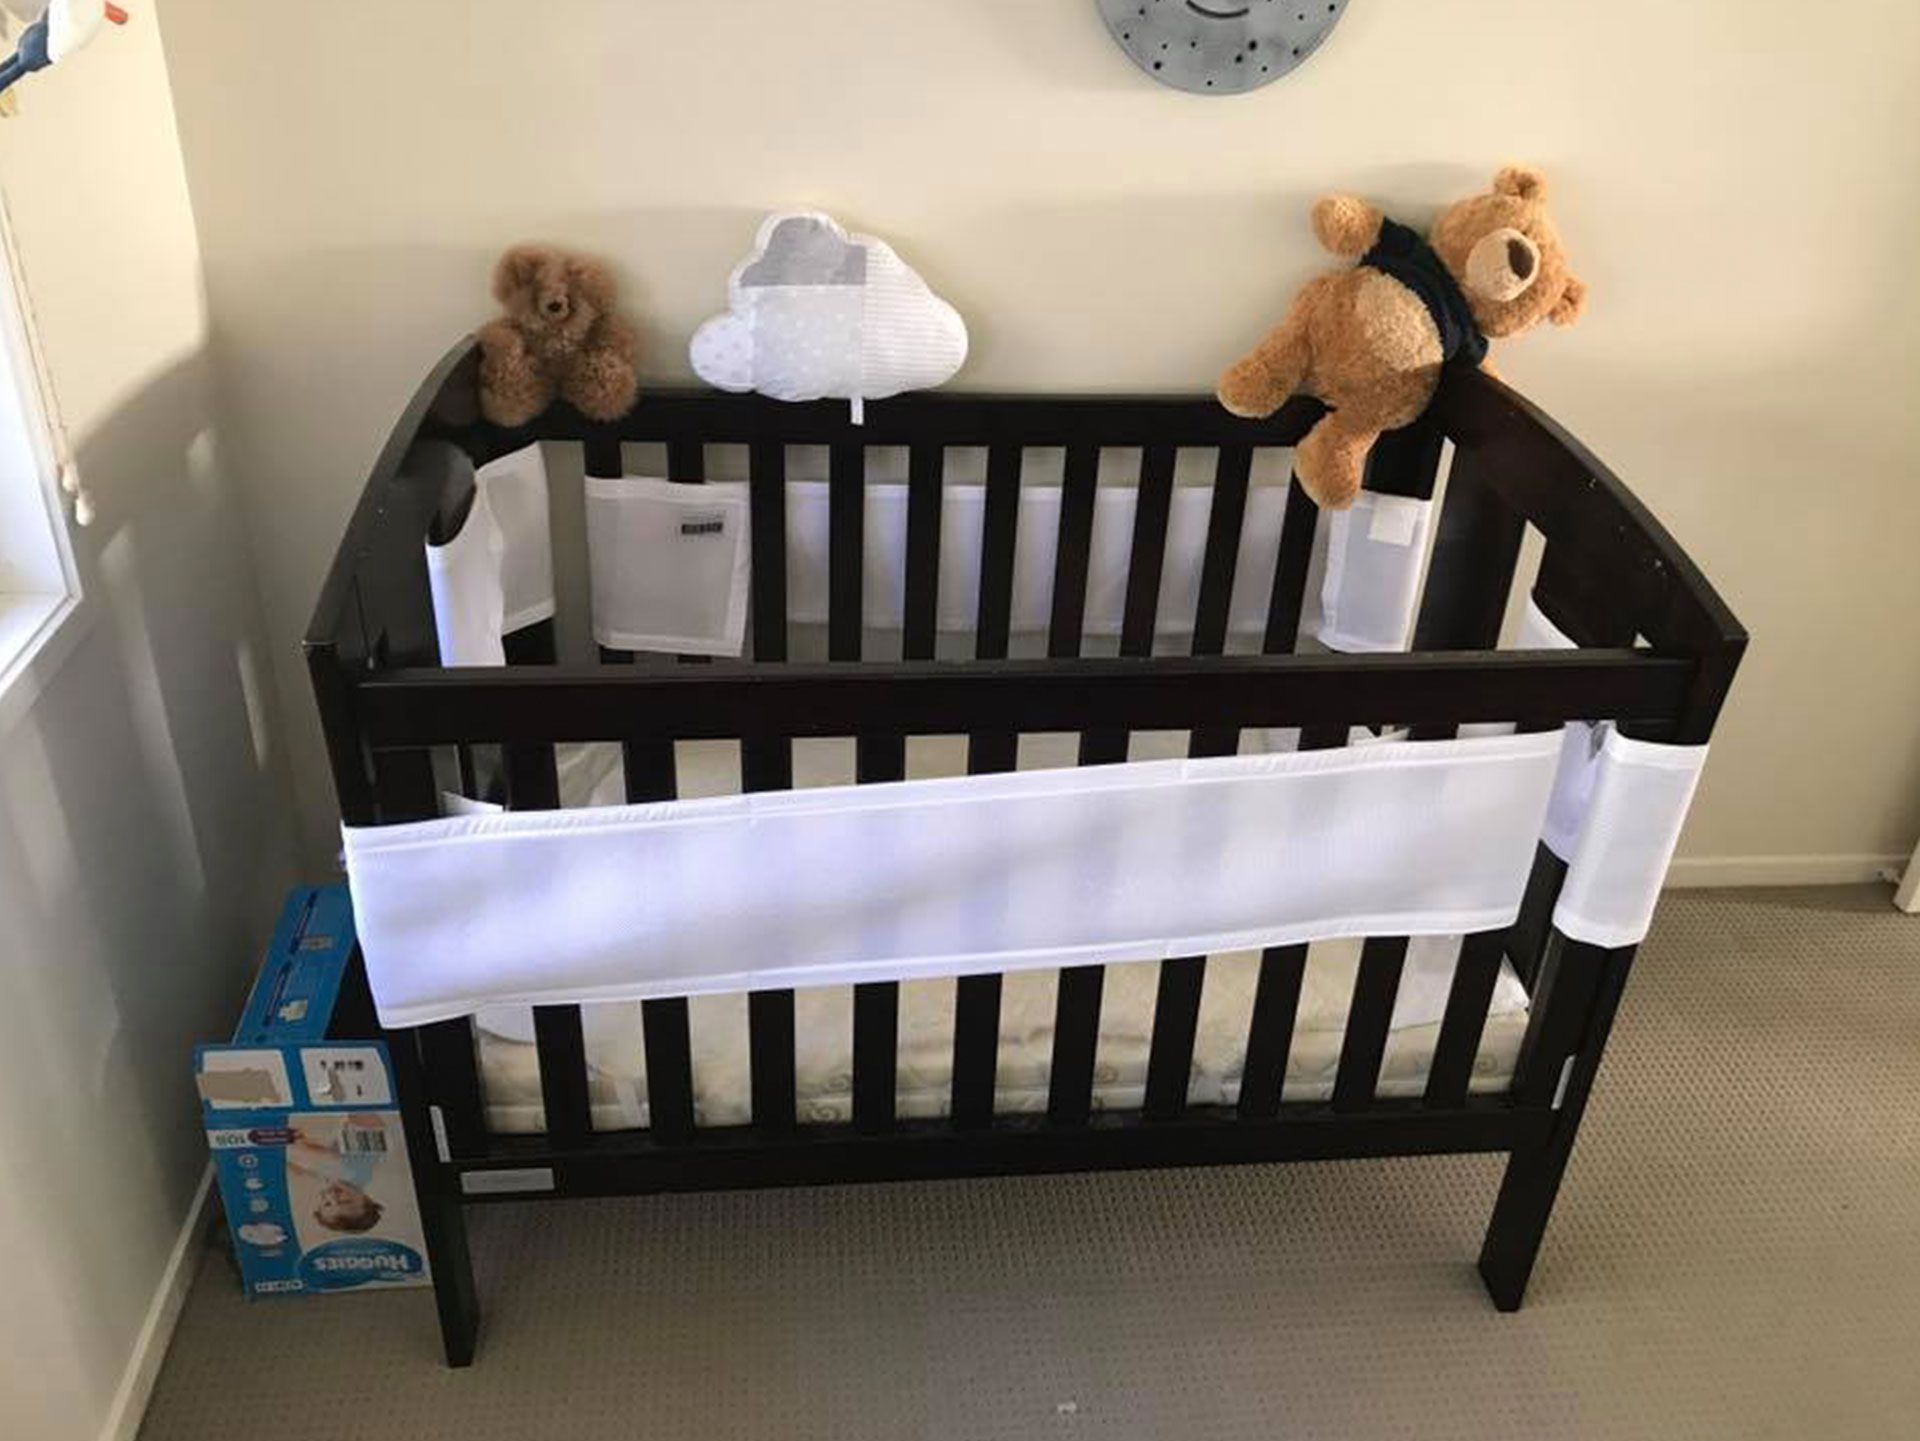 Can you see the snake next to the baby's cot in this picture?